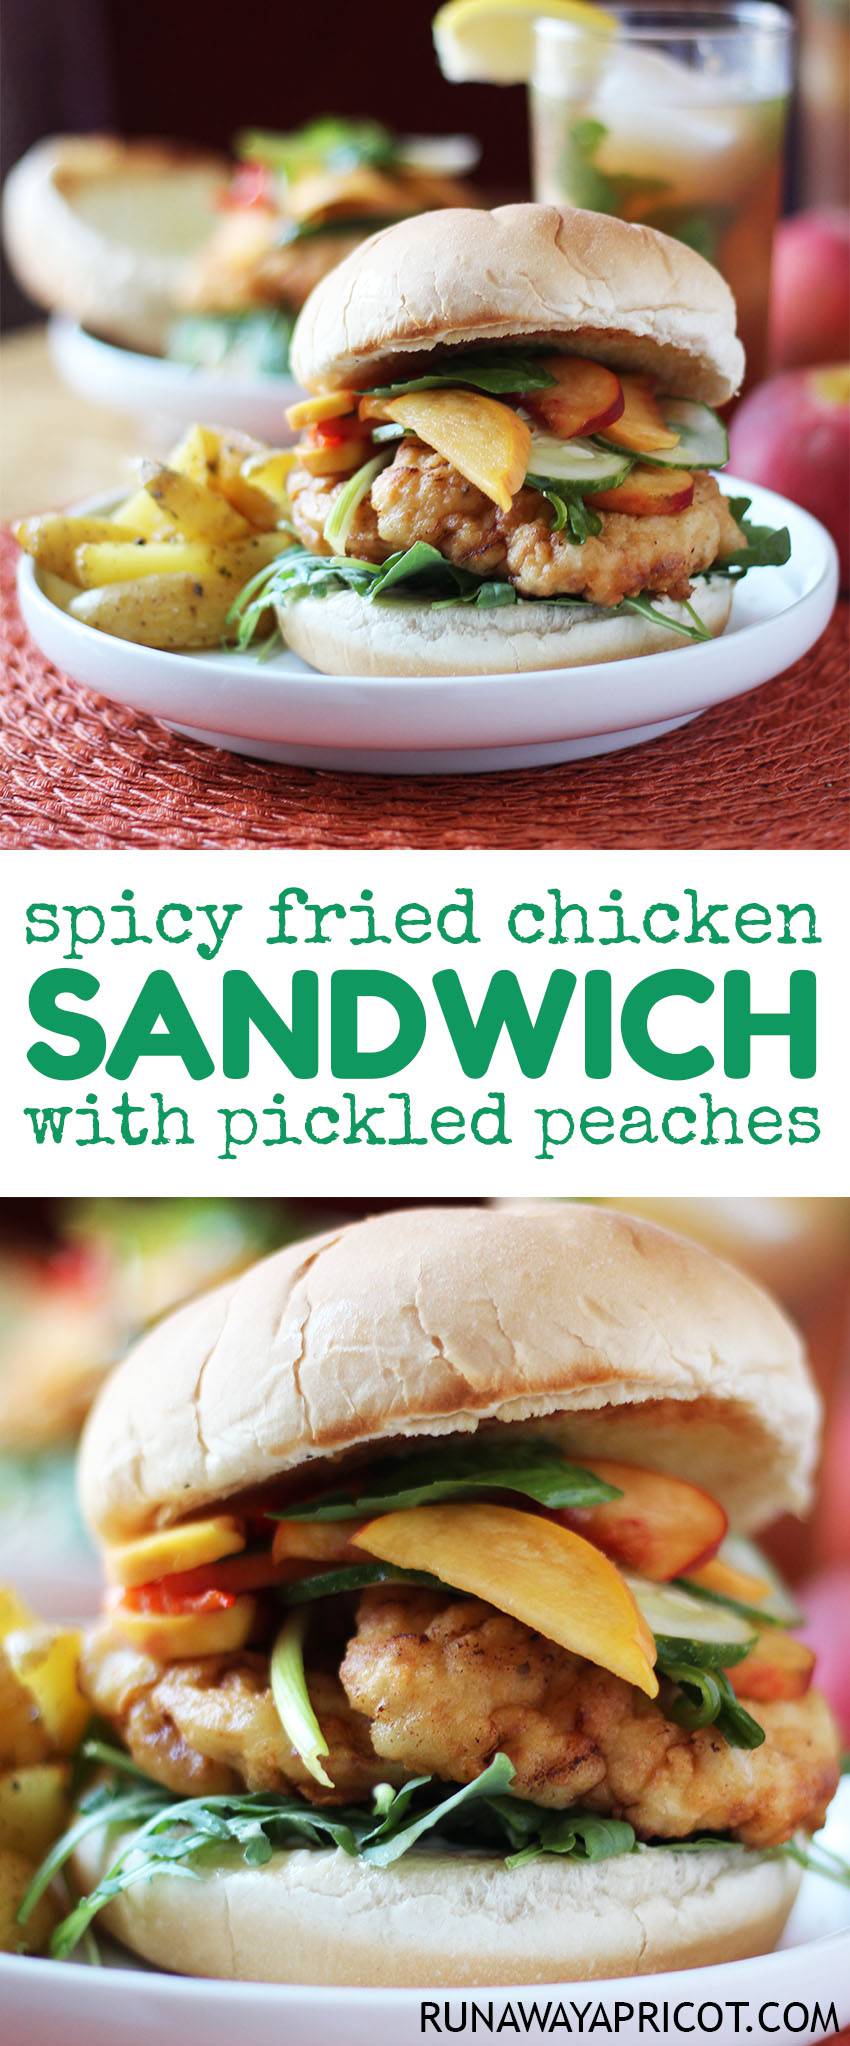 Spicy Fried Chicken Sandwich with Pickled Peaches. A drool-worthy sandwich with all the best flavors of summer.